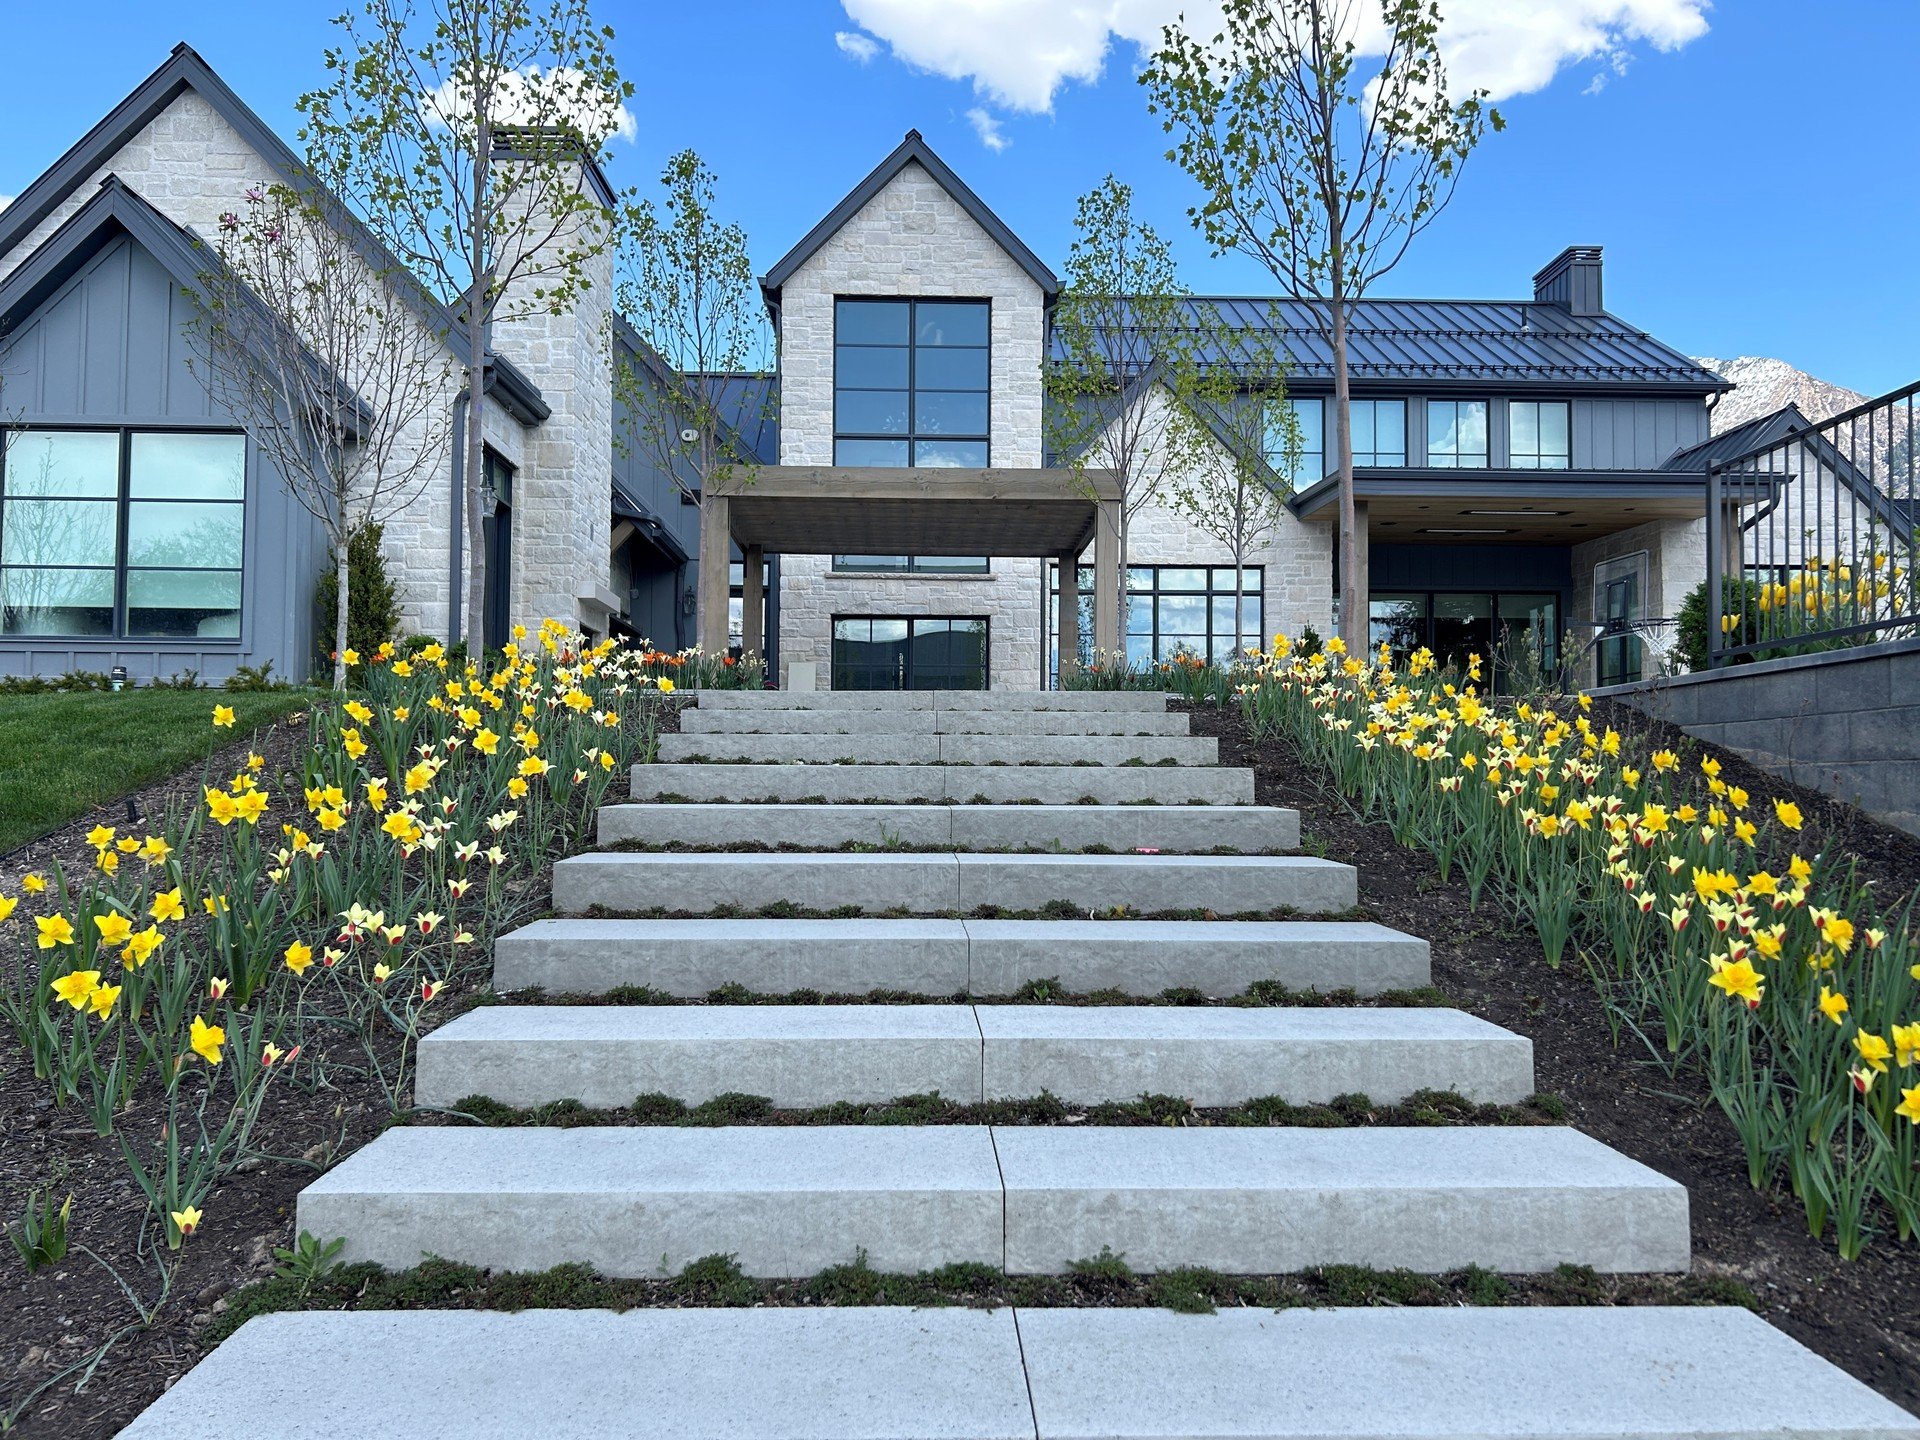 Daffodils and tulips and all the world turning green! 
#spring #landscapedesign #landscape #utahlandscaper #tulips #daffodils #boxwoods #stonecraft #stonestairs #entry #blooms